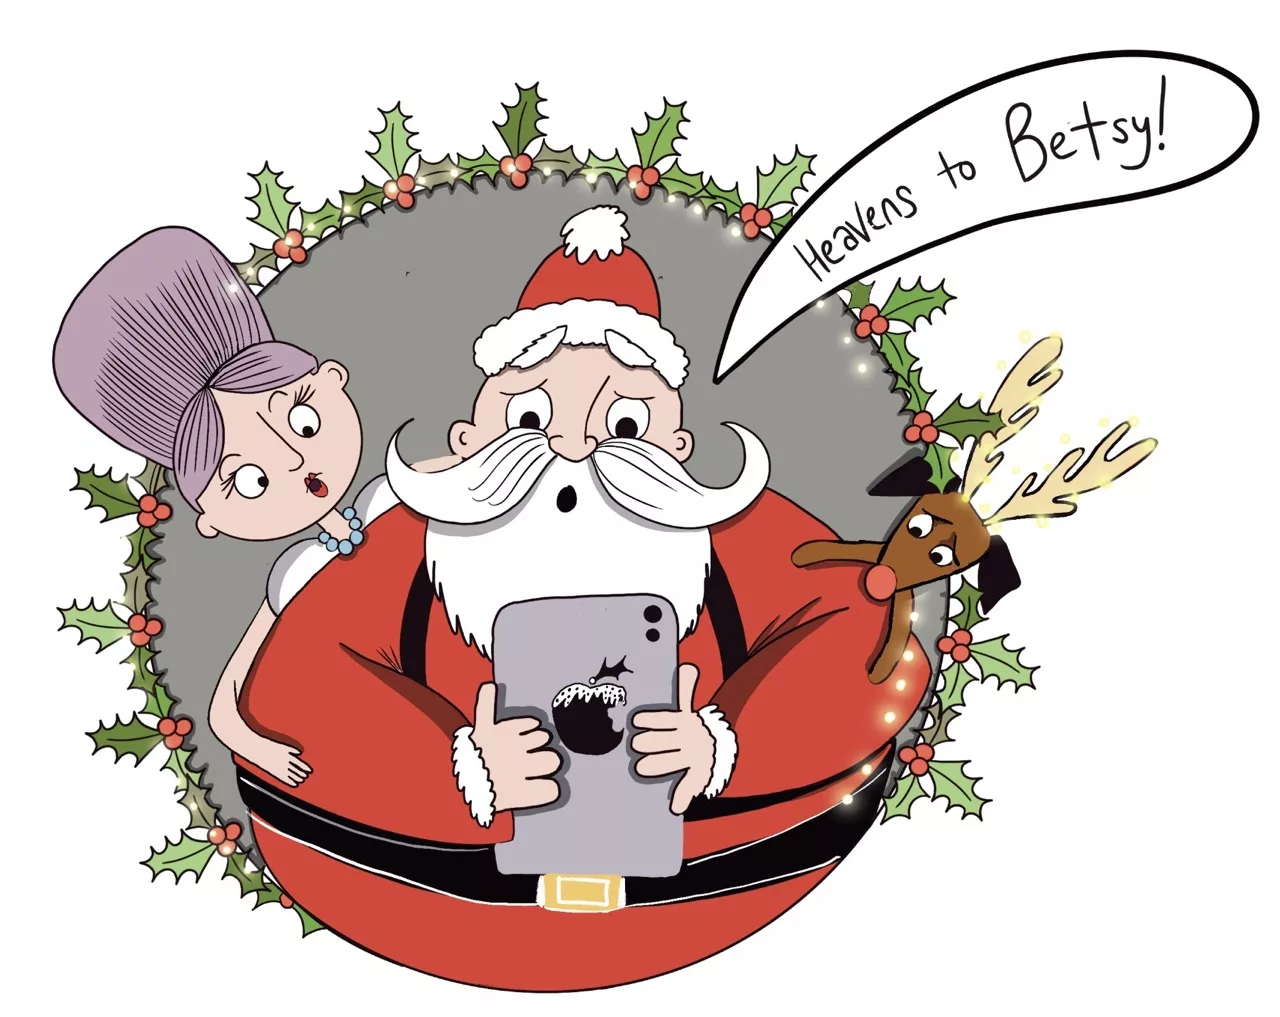 Profile image of Santa for Meet The Characters. In this image he's reading the alarm message on his Imposteradar and exclaims "Heavens to Betsy" with Mrs Claus and Rudolph looking over his shoulder.